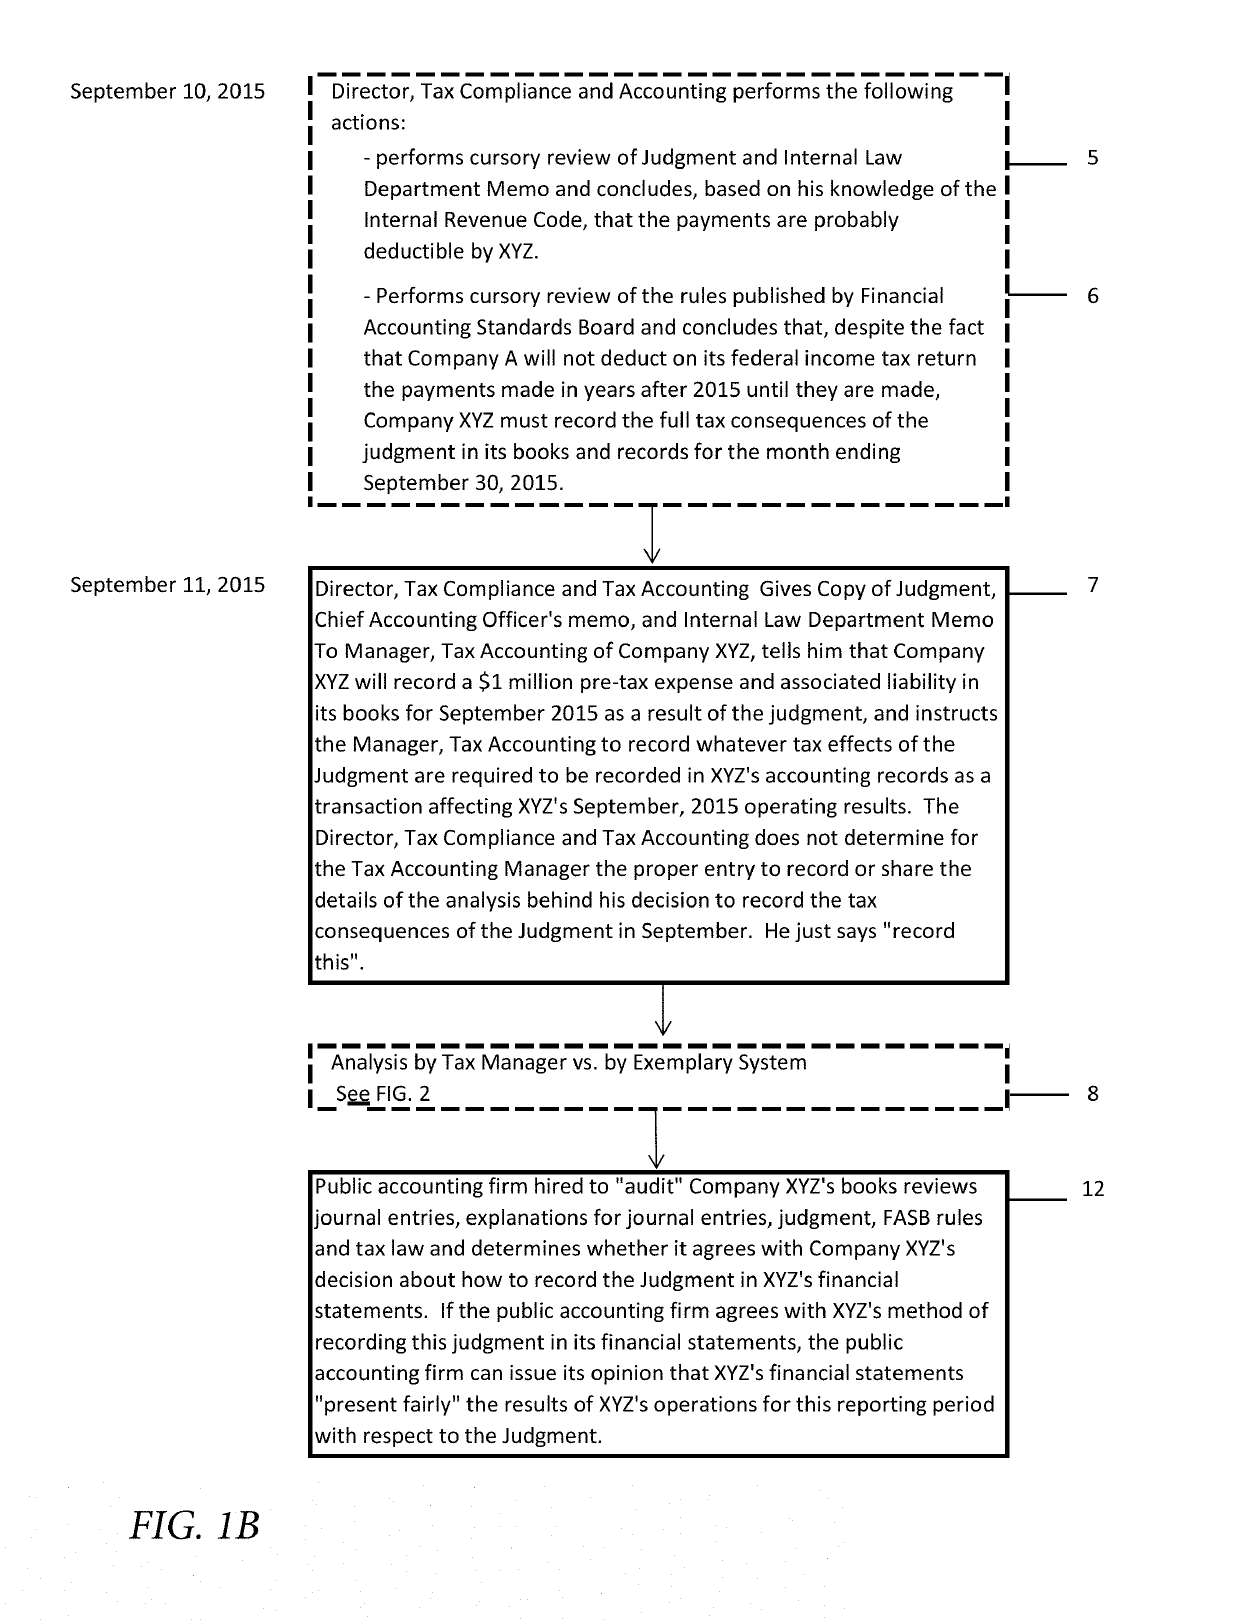 Determining correct answers to tax and accounting issues arising from business transactions and generating accounting entries to record those transactions using a computerized predicate logic implementation